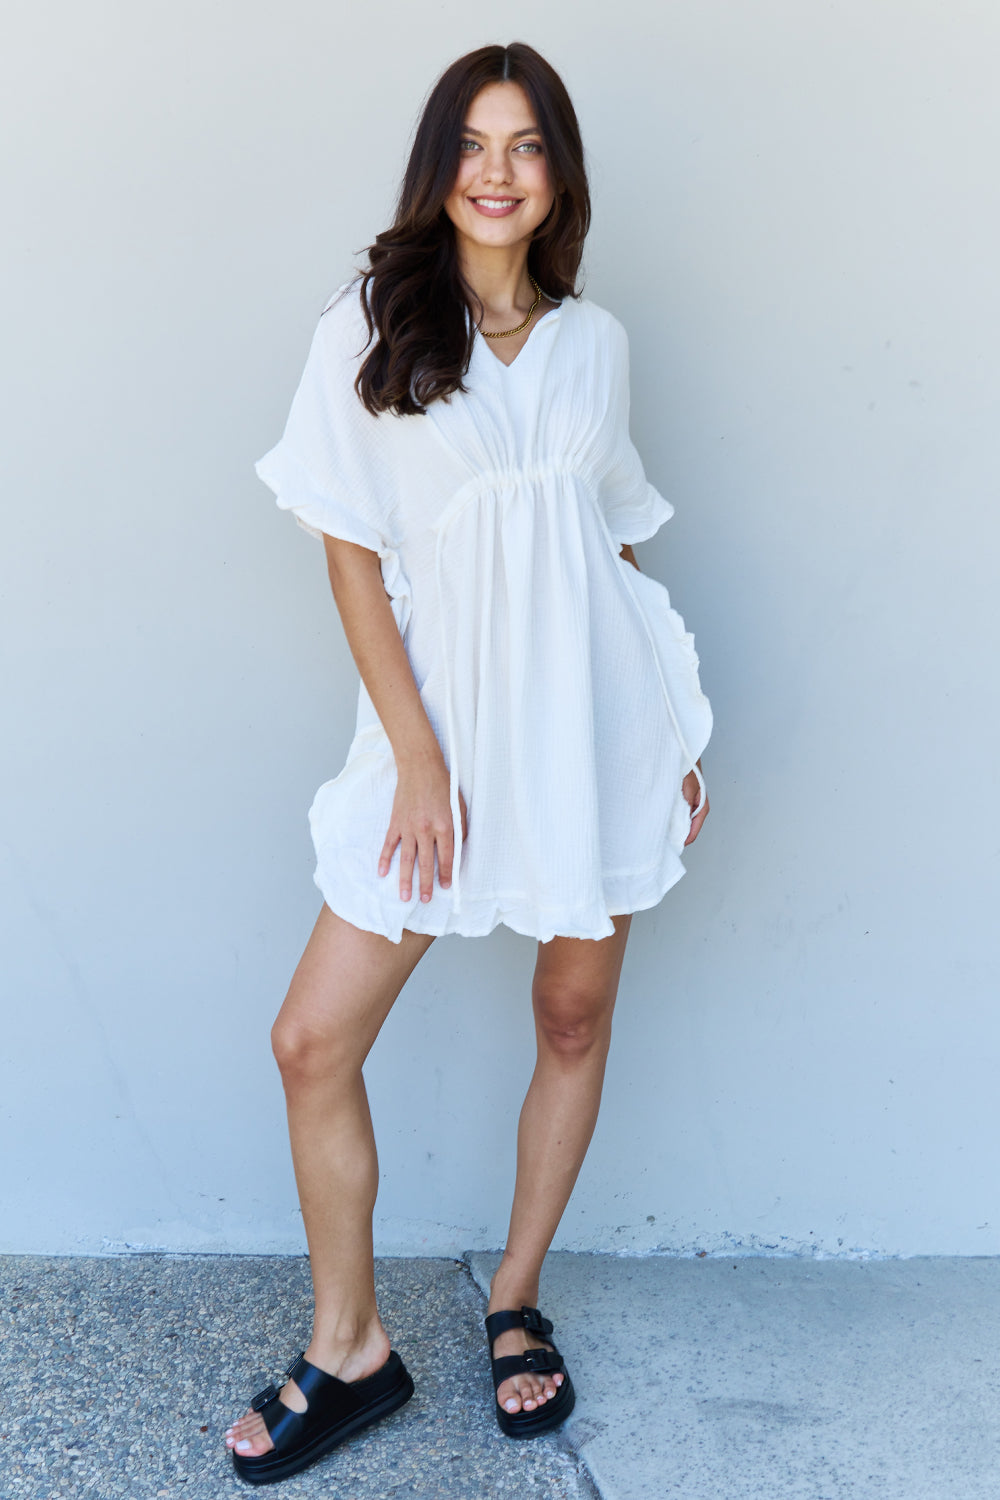 Ninexis Out Of Time Full Size Ruffle Hem Dress with Drawstring Waistband in White - DRESSES - White